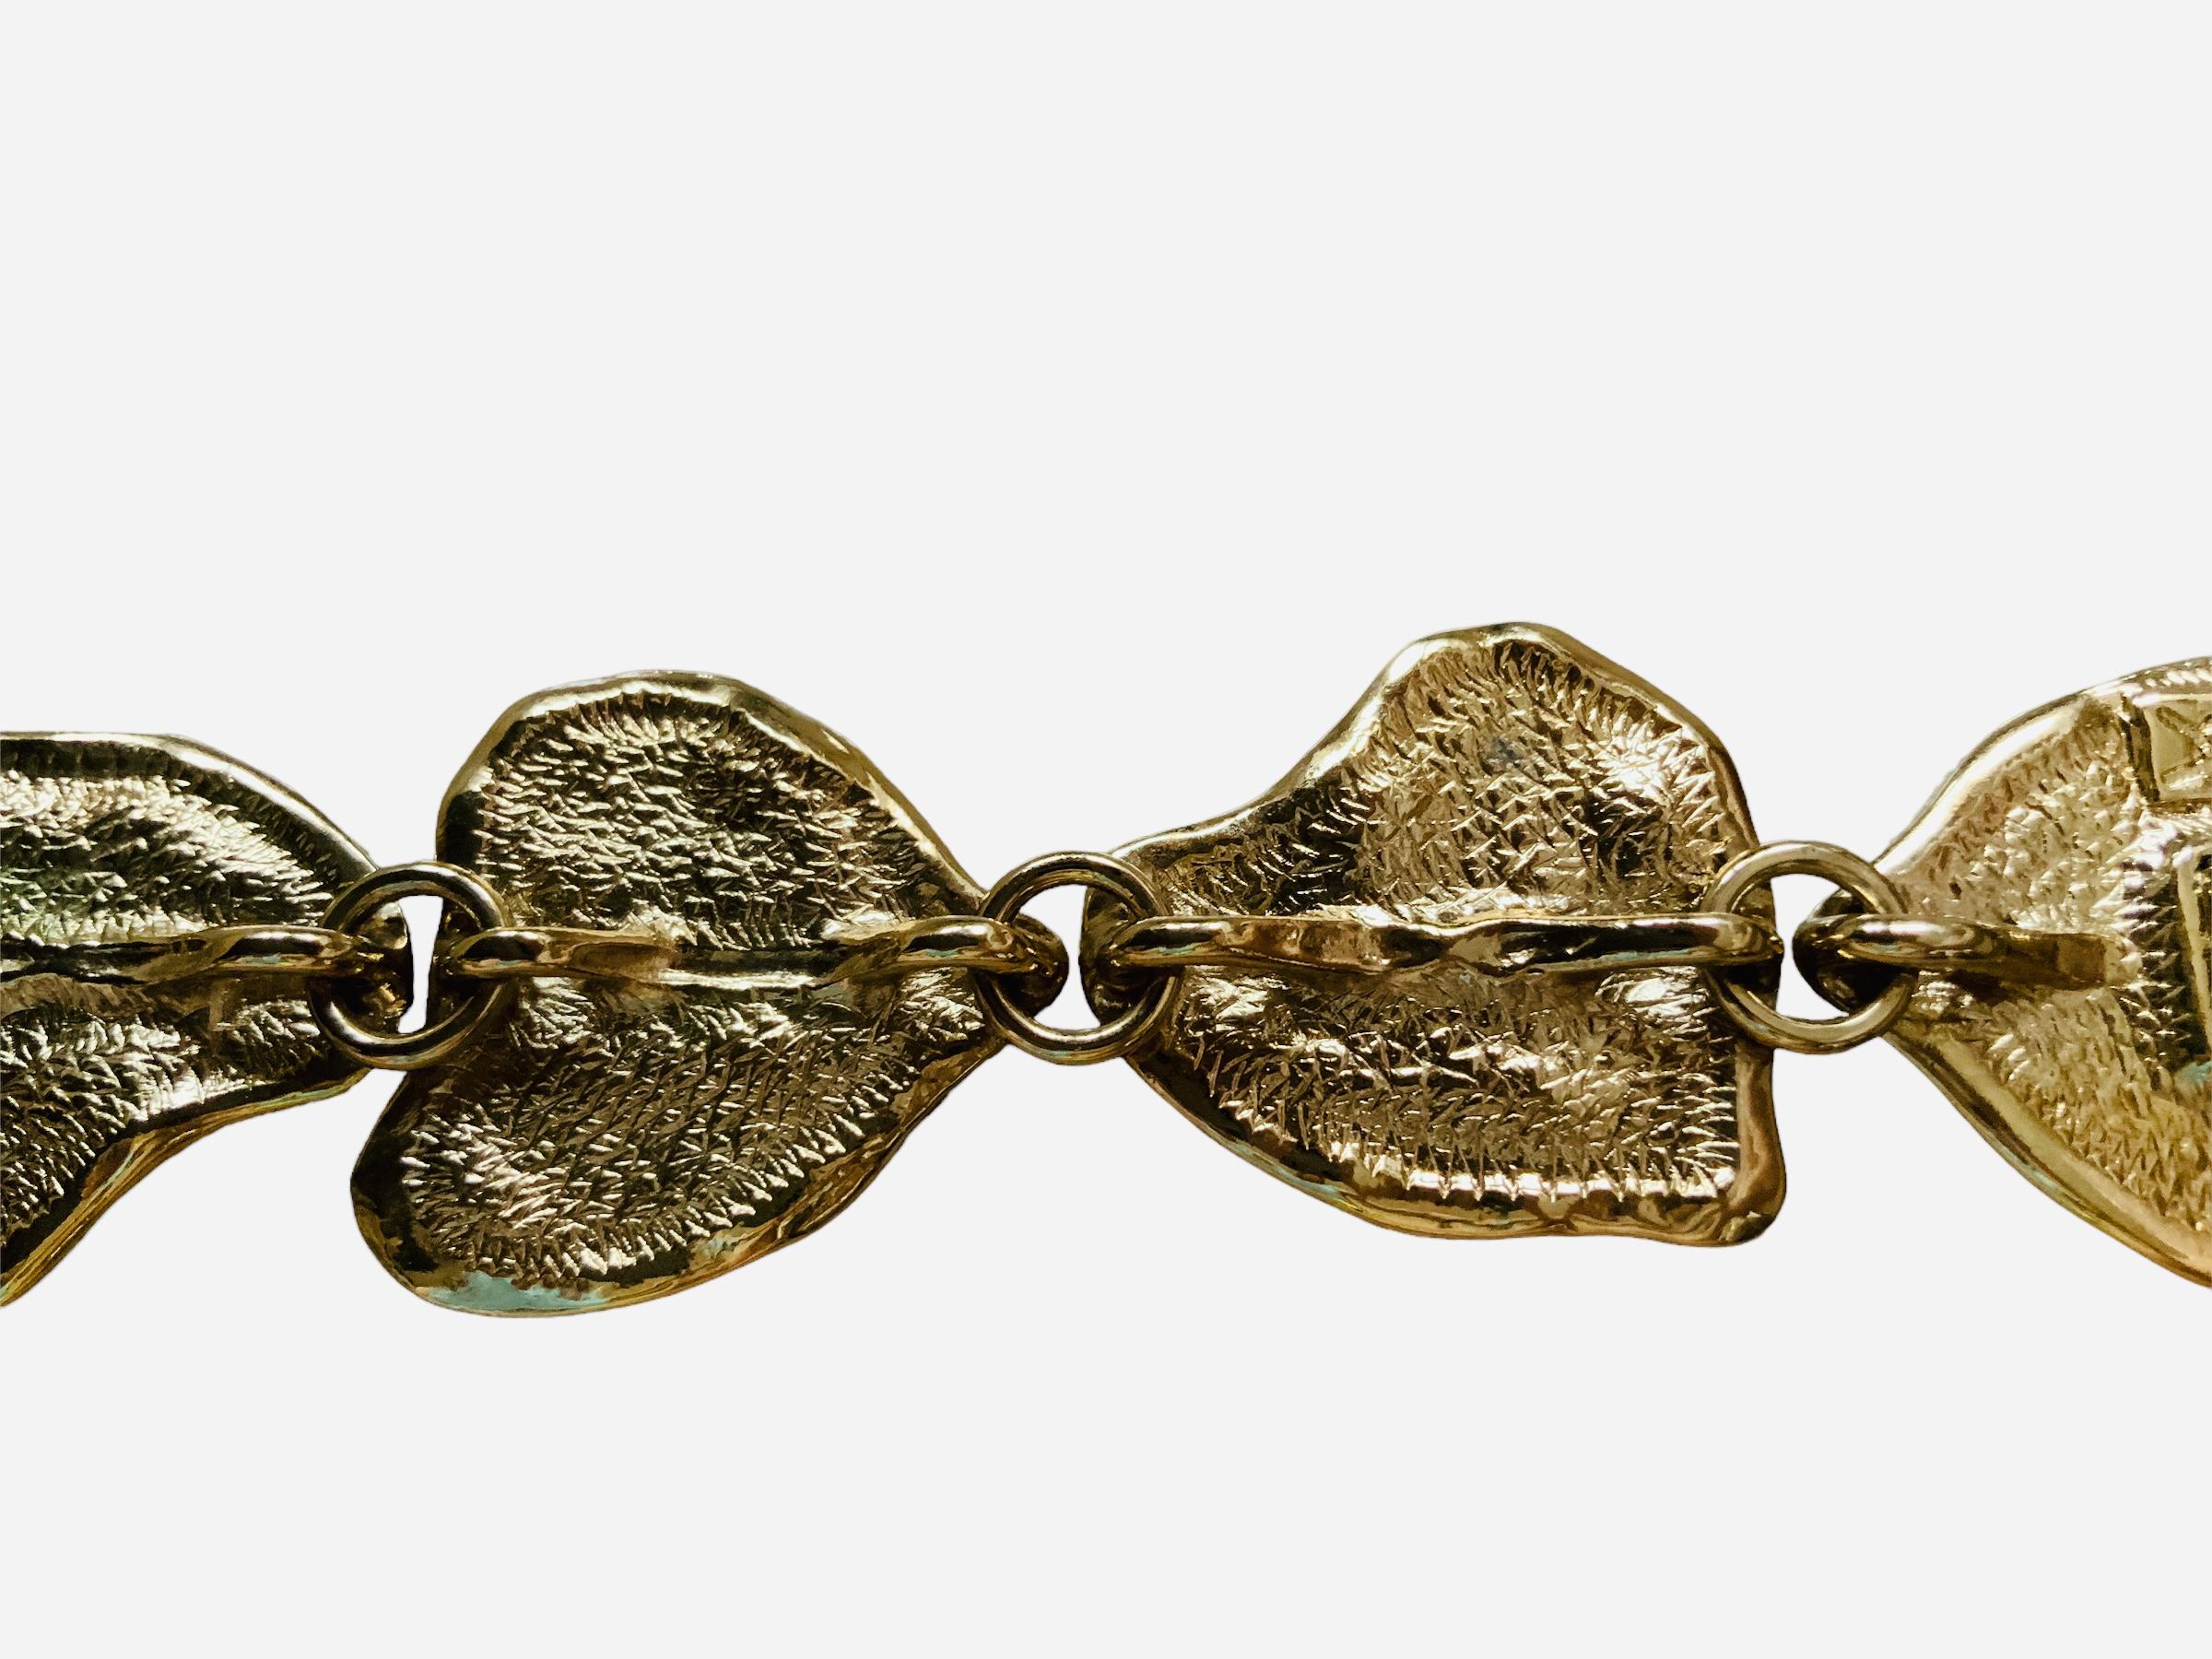 This is a Yves Saint Laurent gold plated link bracelet. It depicts seven asymmetrical rock texture hearts link bracelet. It closes with a hidden clasp box. It is signed with the YSL logo in the back of the clasp box.